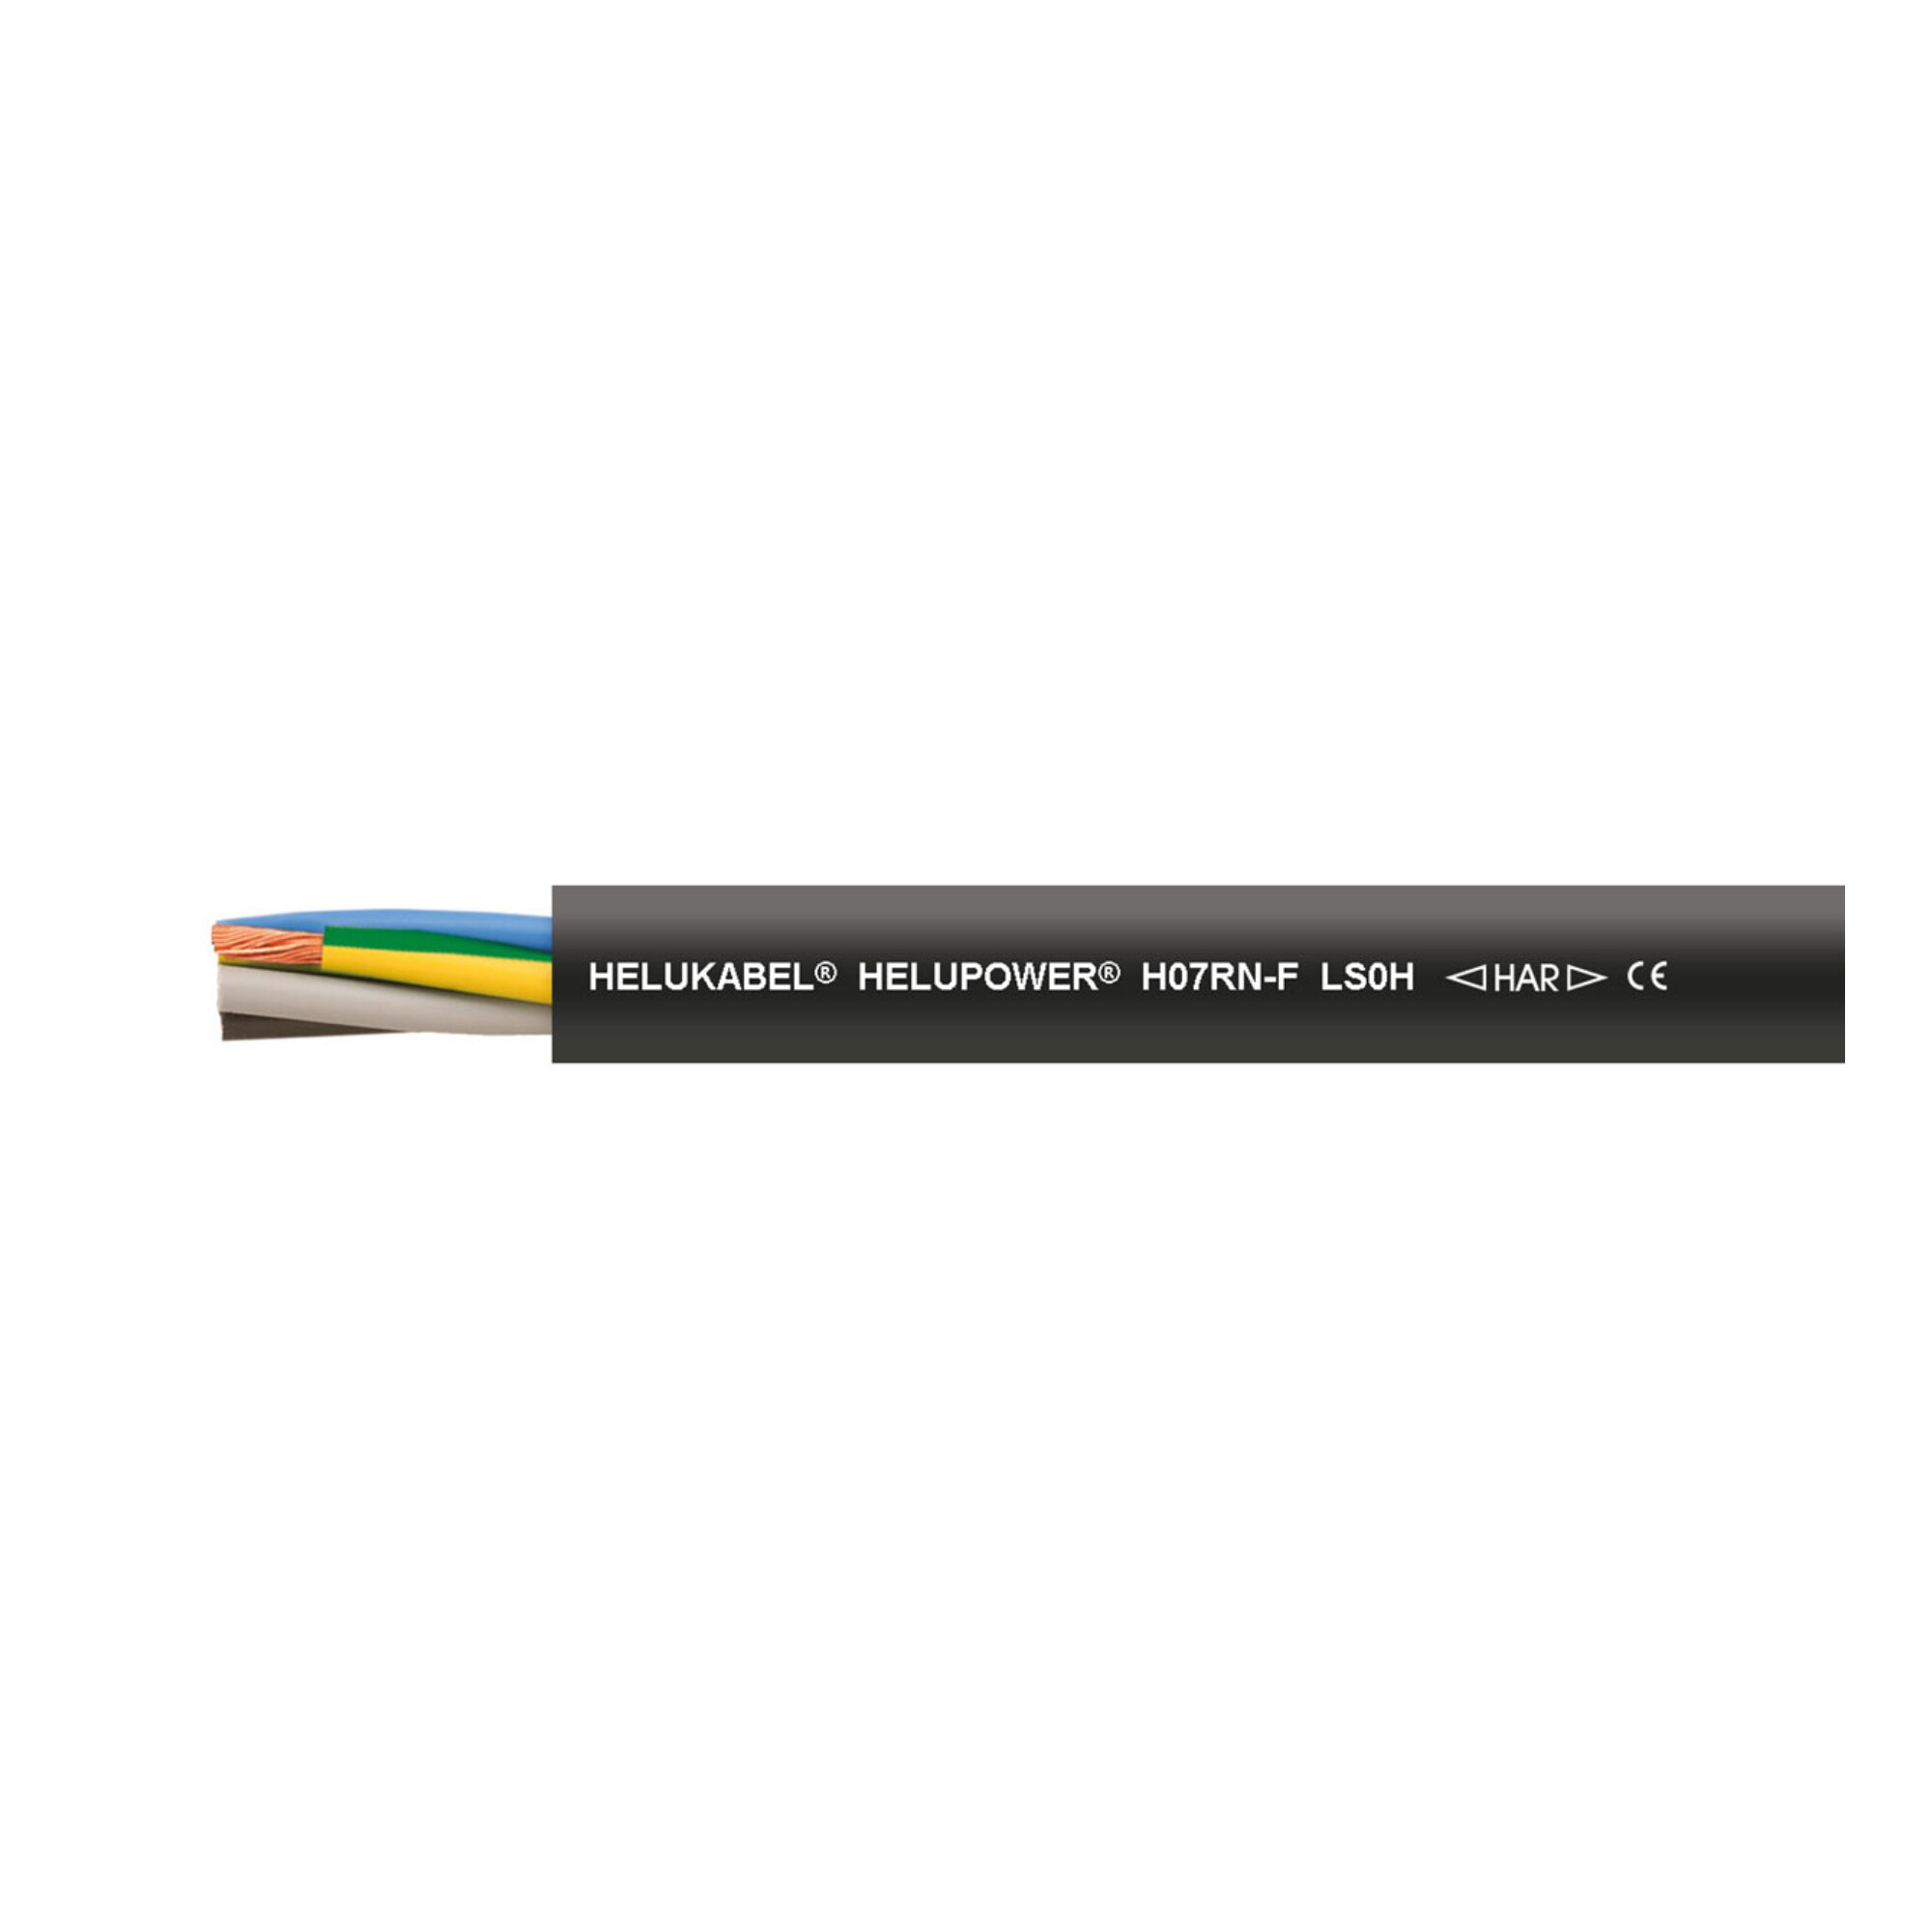 30-30764M0001 HELUPOWER H07RN-F LS0H The HELUPOWER H07RN-F LS0H is a halogen-free rubber cable for use in dry, damp, wet areas and outdoors with medium mechanical stress situations.